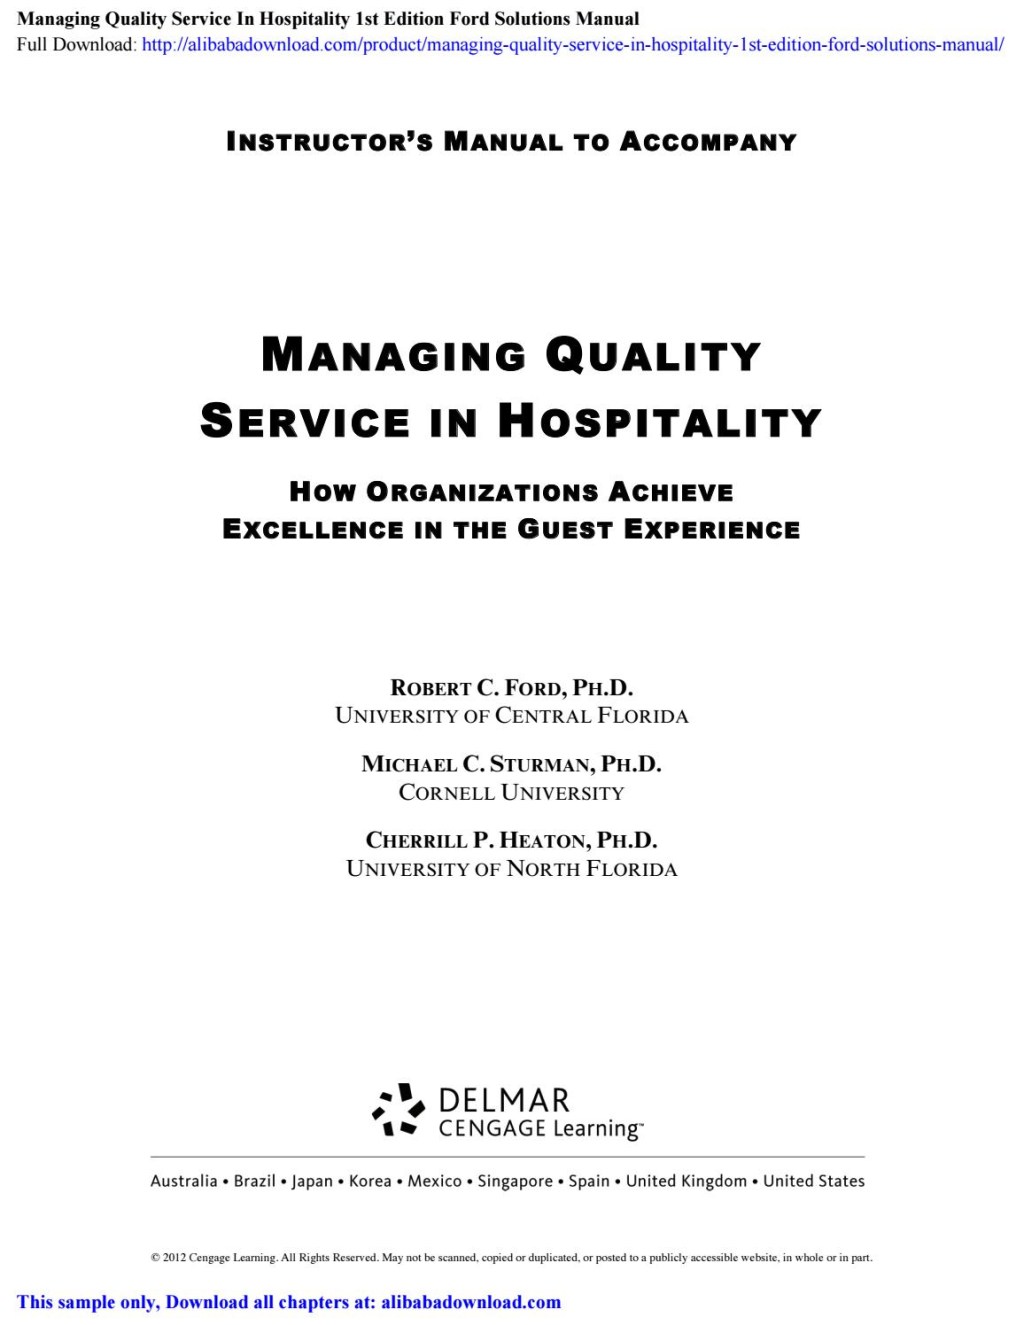 Picture of: Managing Quality Service In Hospitality st Edition Ford Solutions